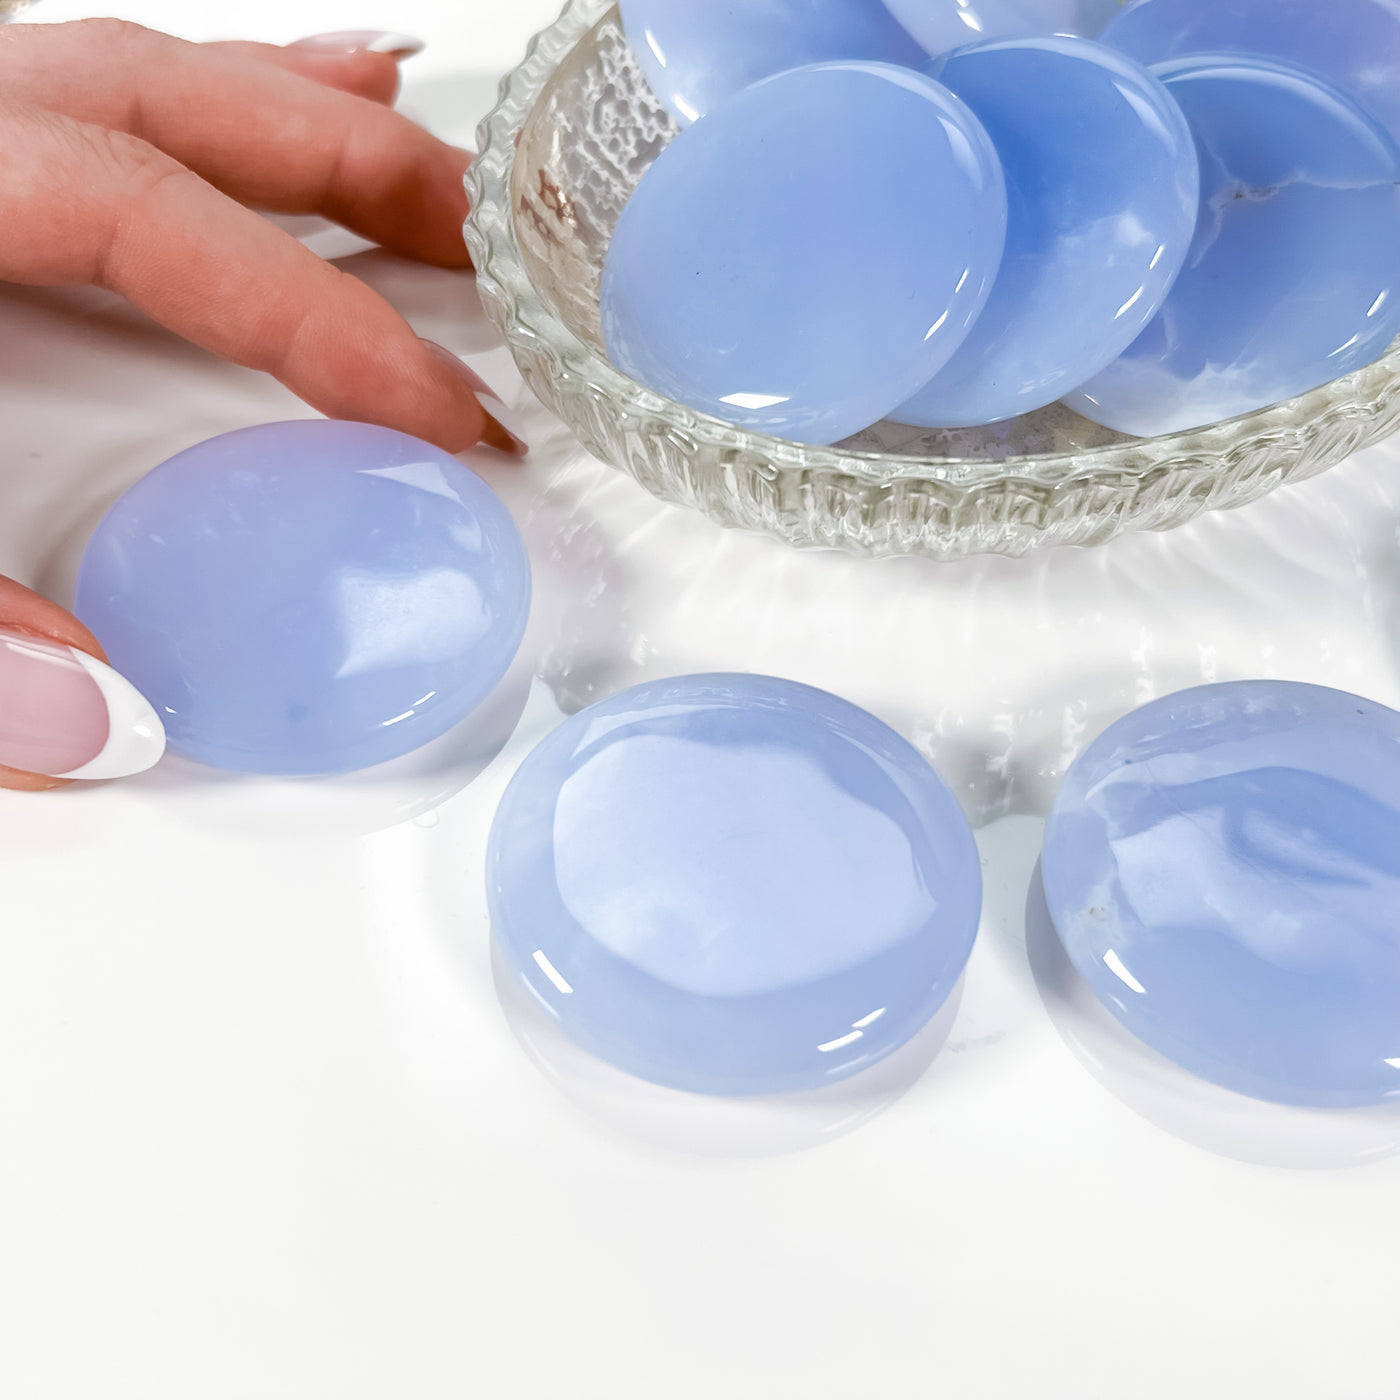 Premium Quality Blue Chalcedony Palm Stones for Stability